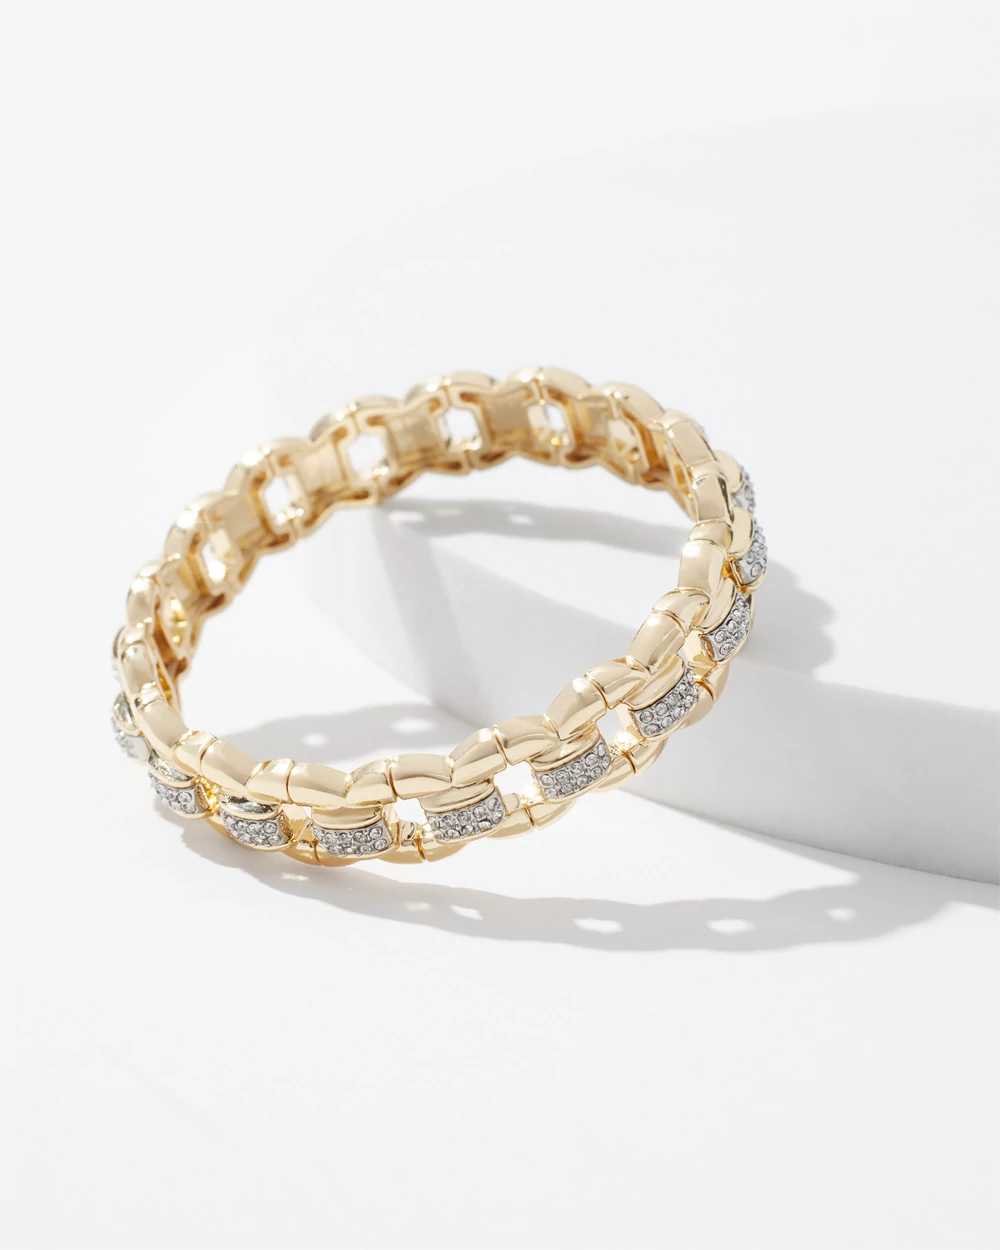 Gold Pave Link Stretch Bracelet click to view larger image.